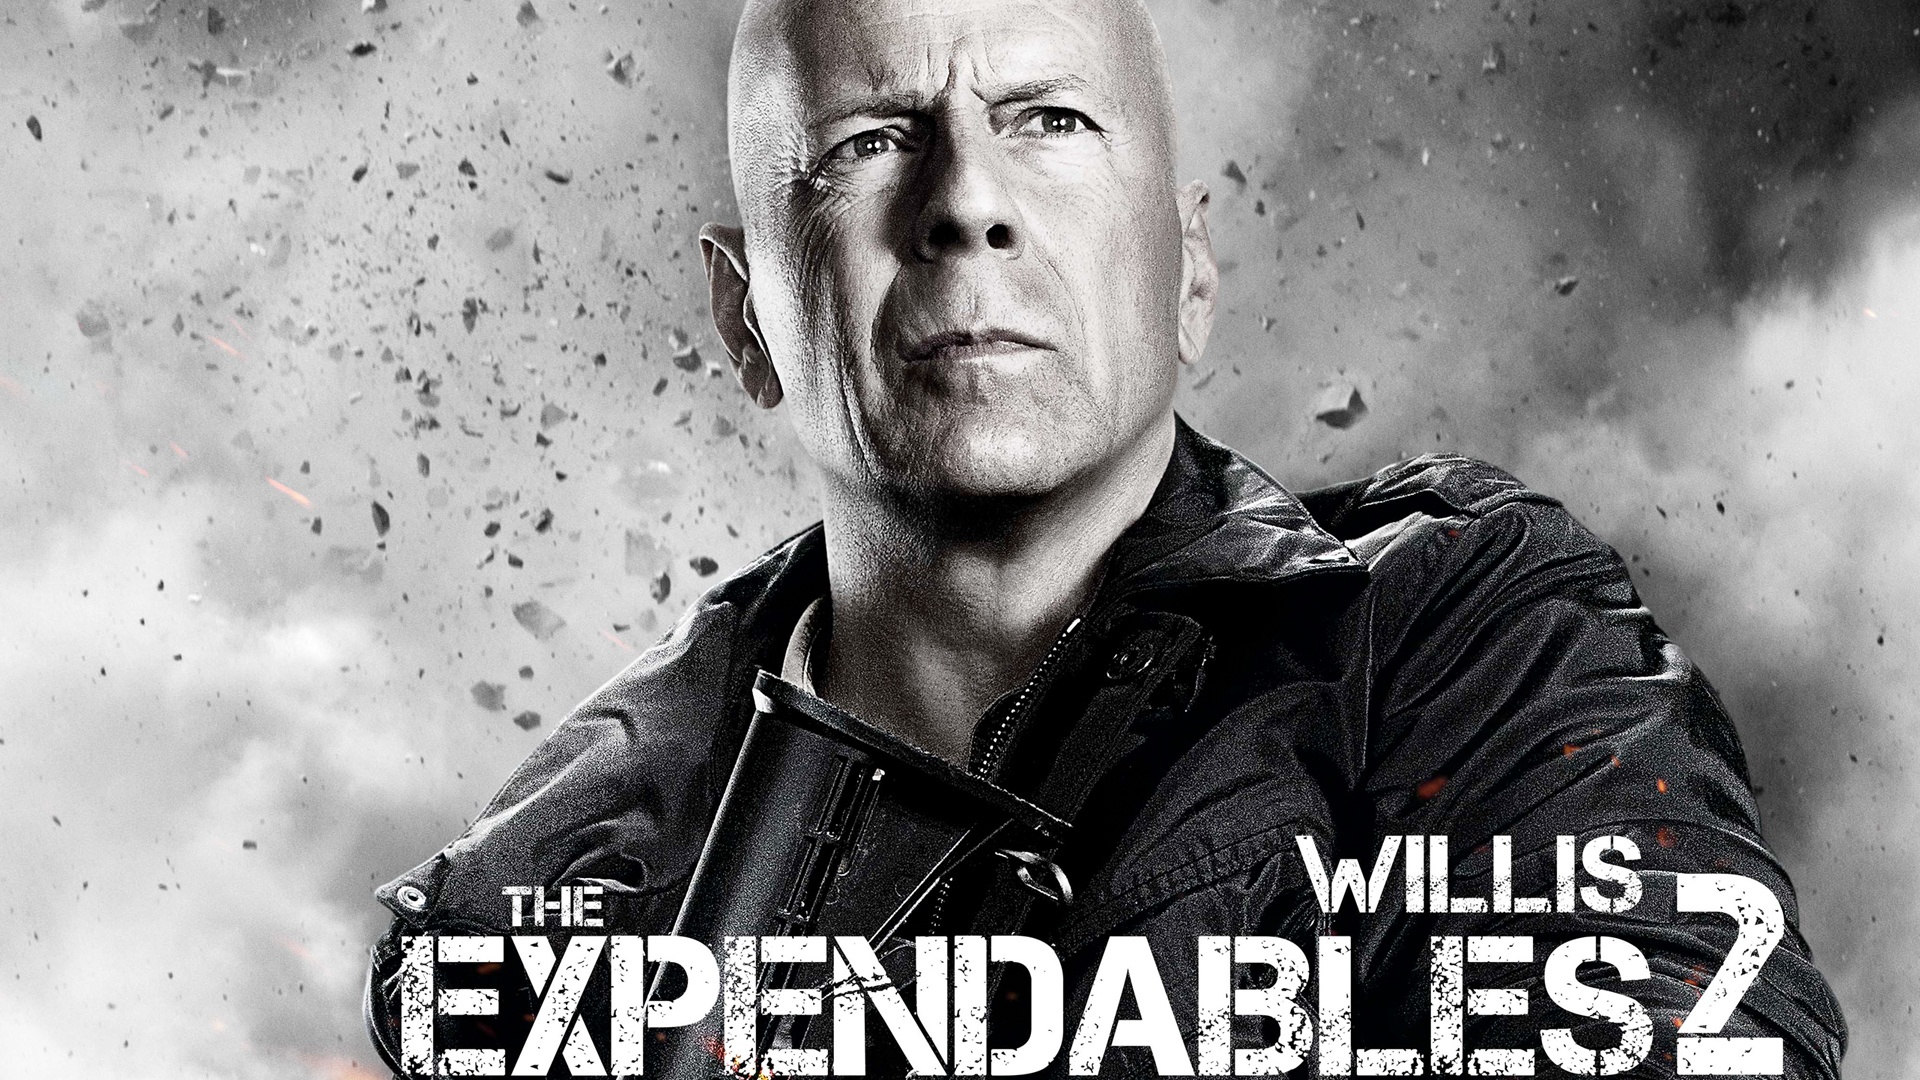 Bruce Willis in Expendables 2